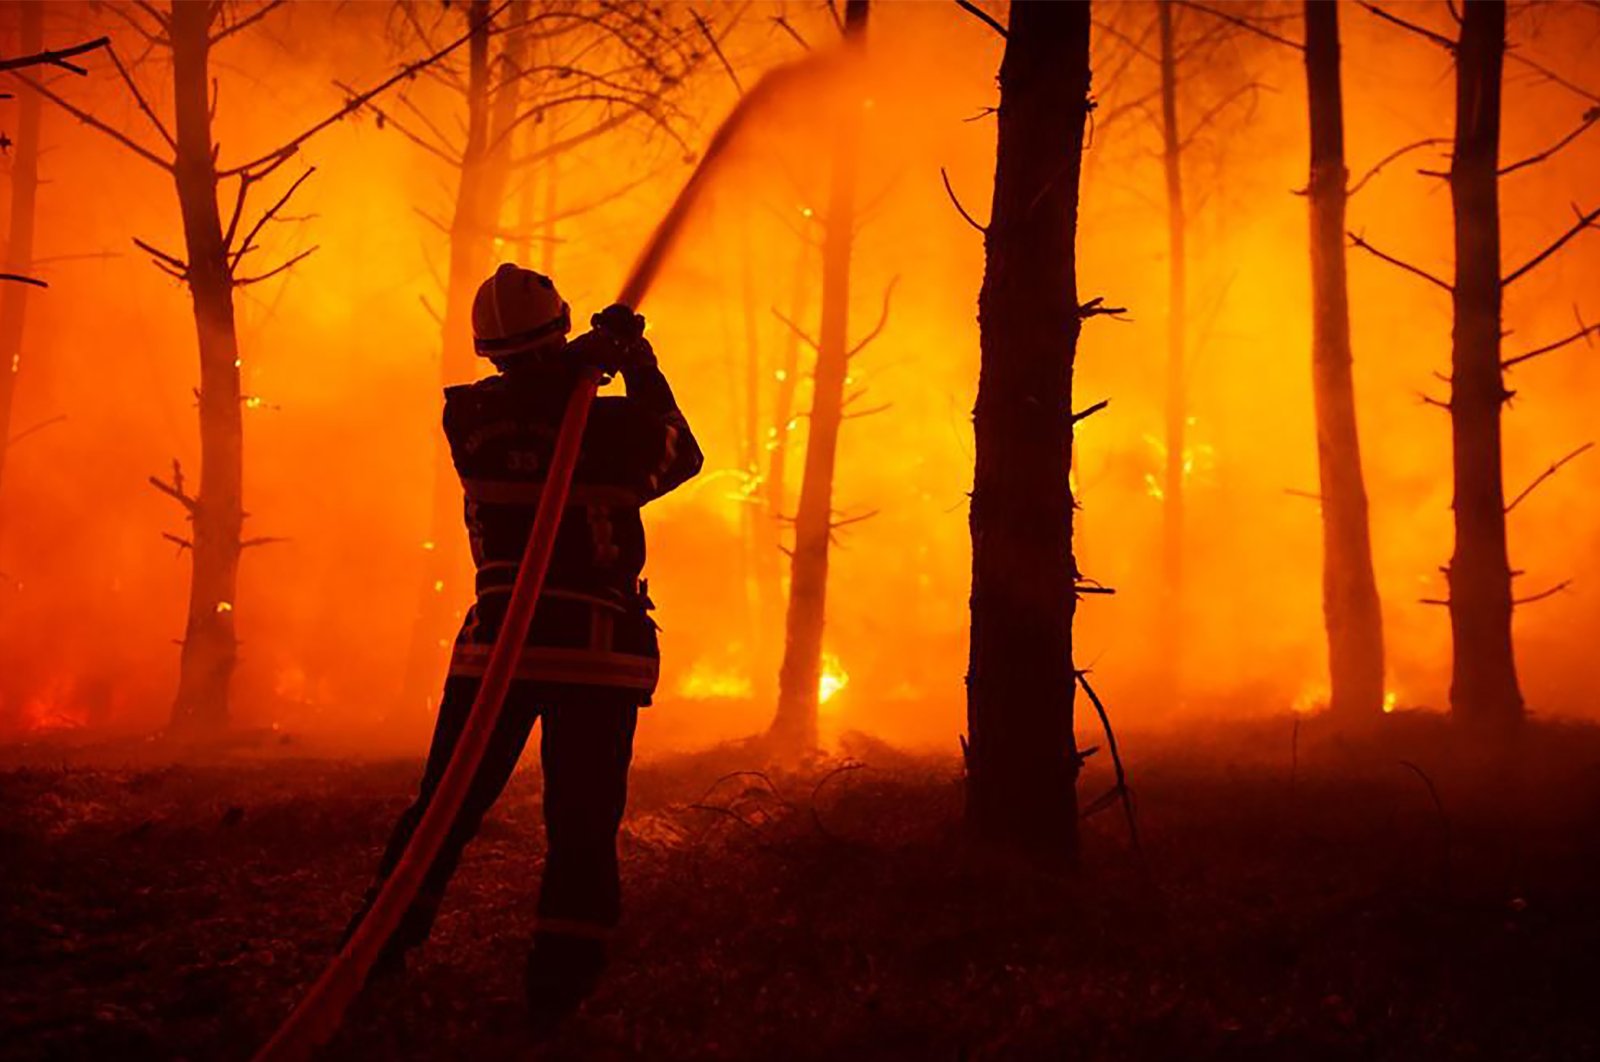 This photo provided by the fire brigade of the Gironde region (SDIS 33) shows a firefighter puts water on a trees at a forest fire at La Test-de-Buch, southwestern France, July 18, 2022. (SDIS 33 via AP)